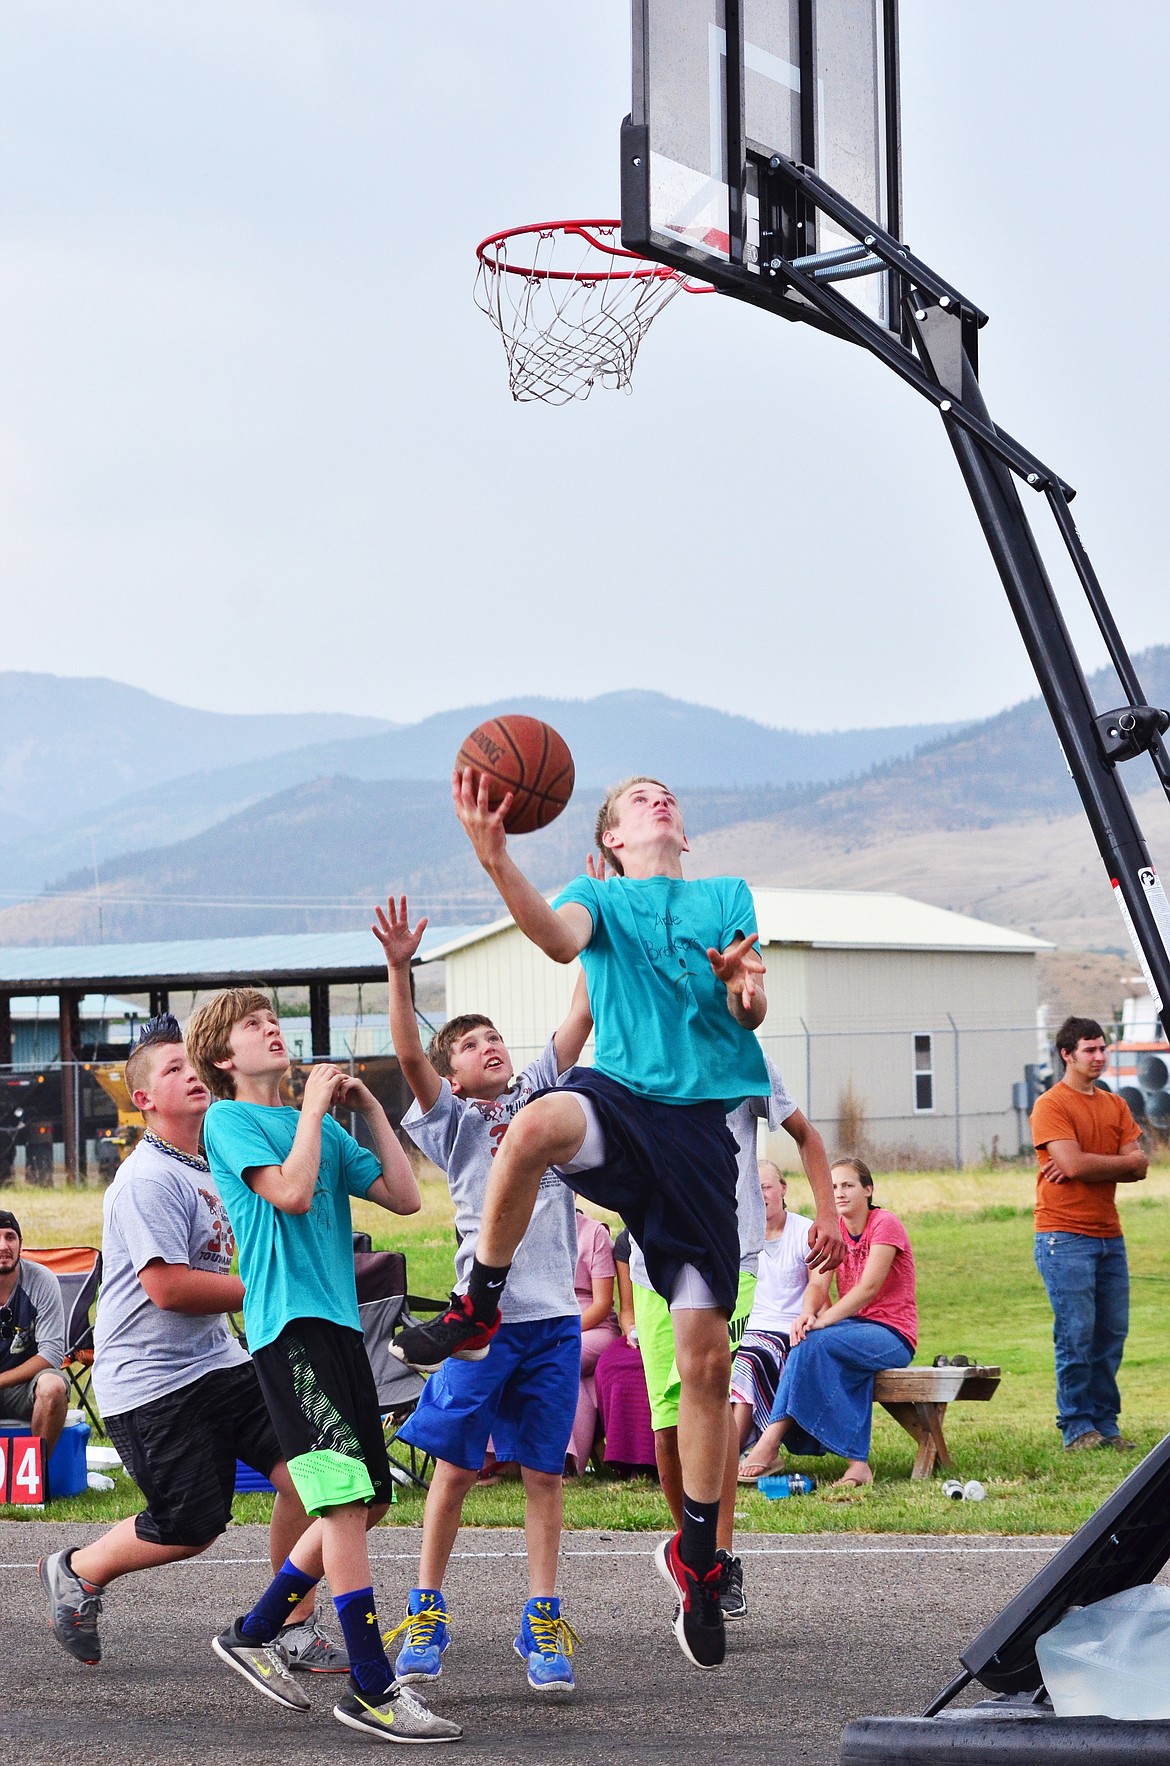 MANY teams were in action this weekend for the 3-on-3 basketball tournament in Plains. (Erin Jusseaume/Valley Press)